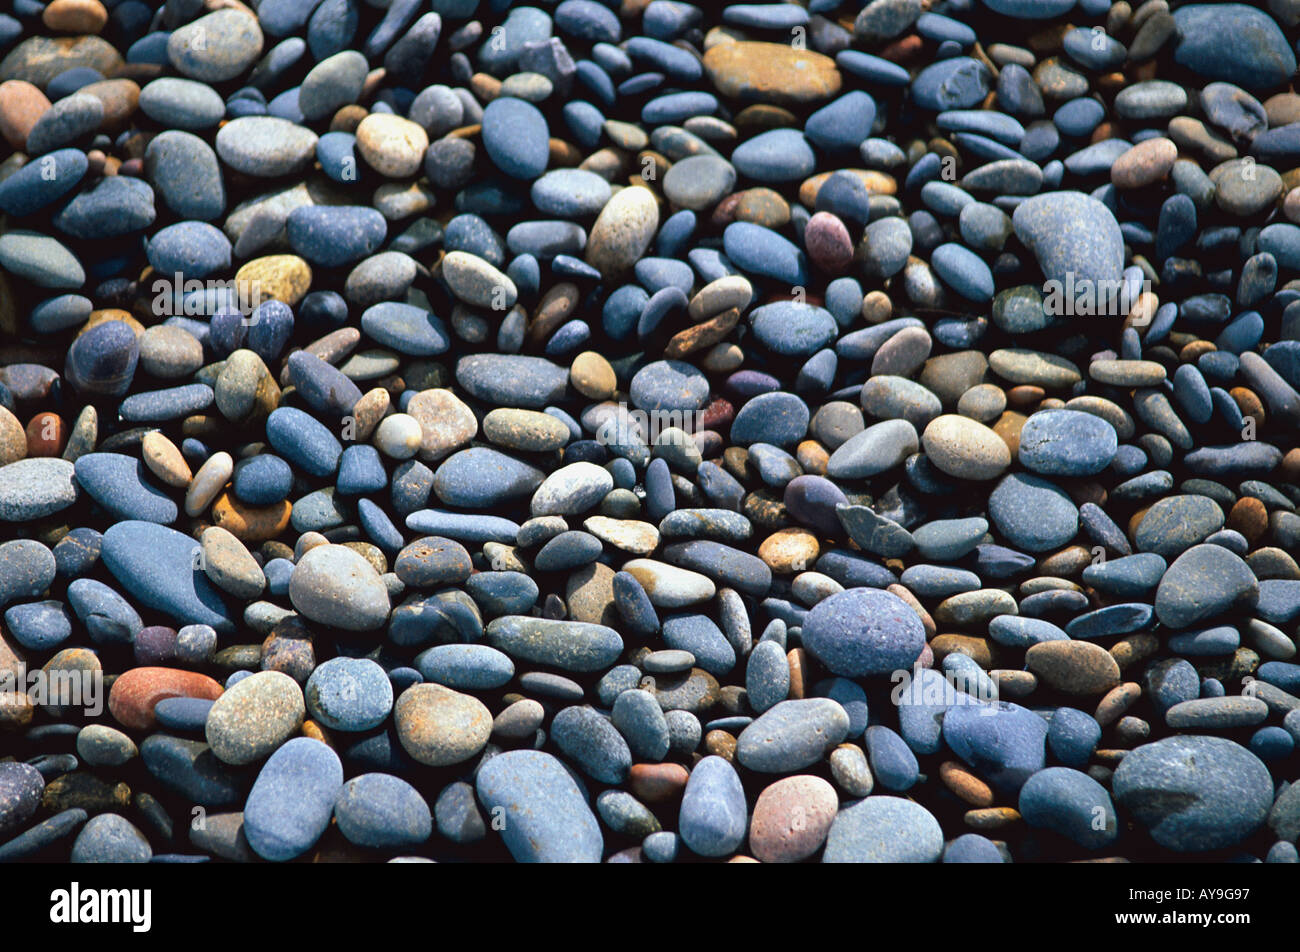 Stones shaped by the ocean waves making an abstract pattern on the beach after a storm in a group pattern caused by nature Stock Photo